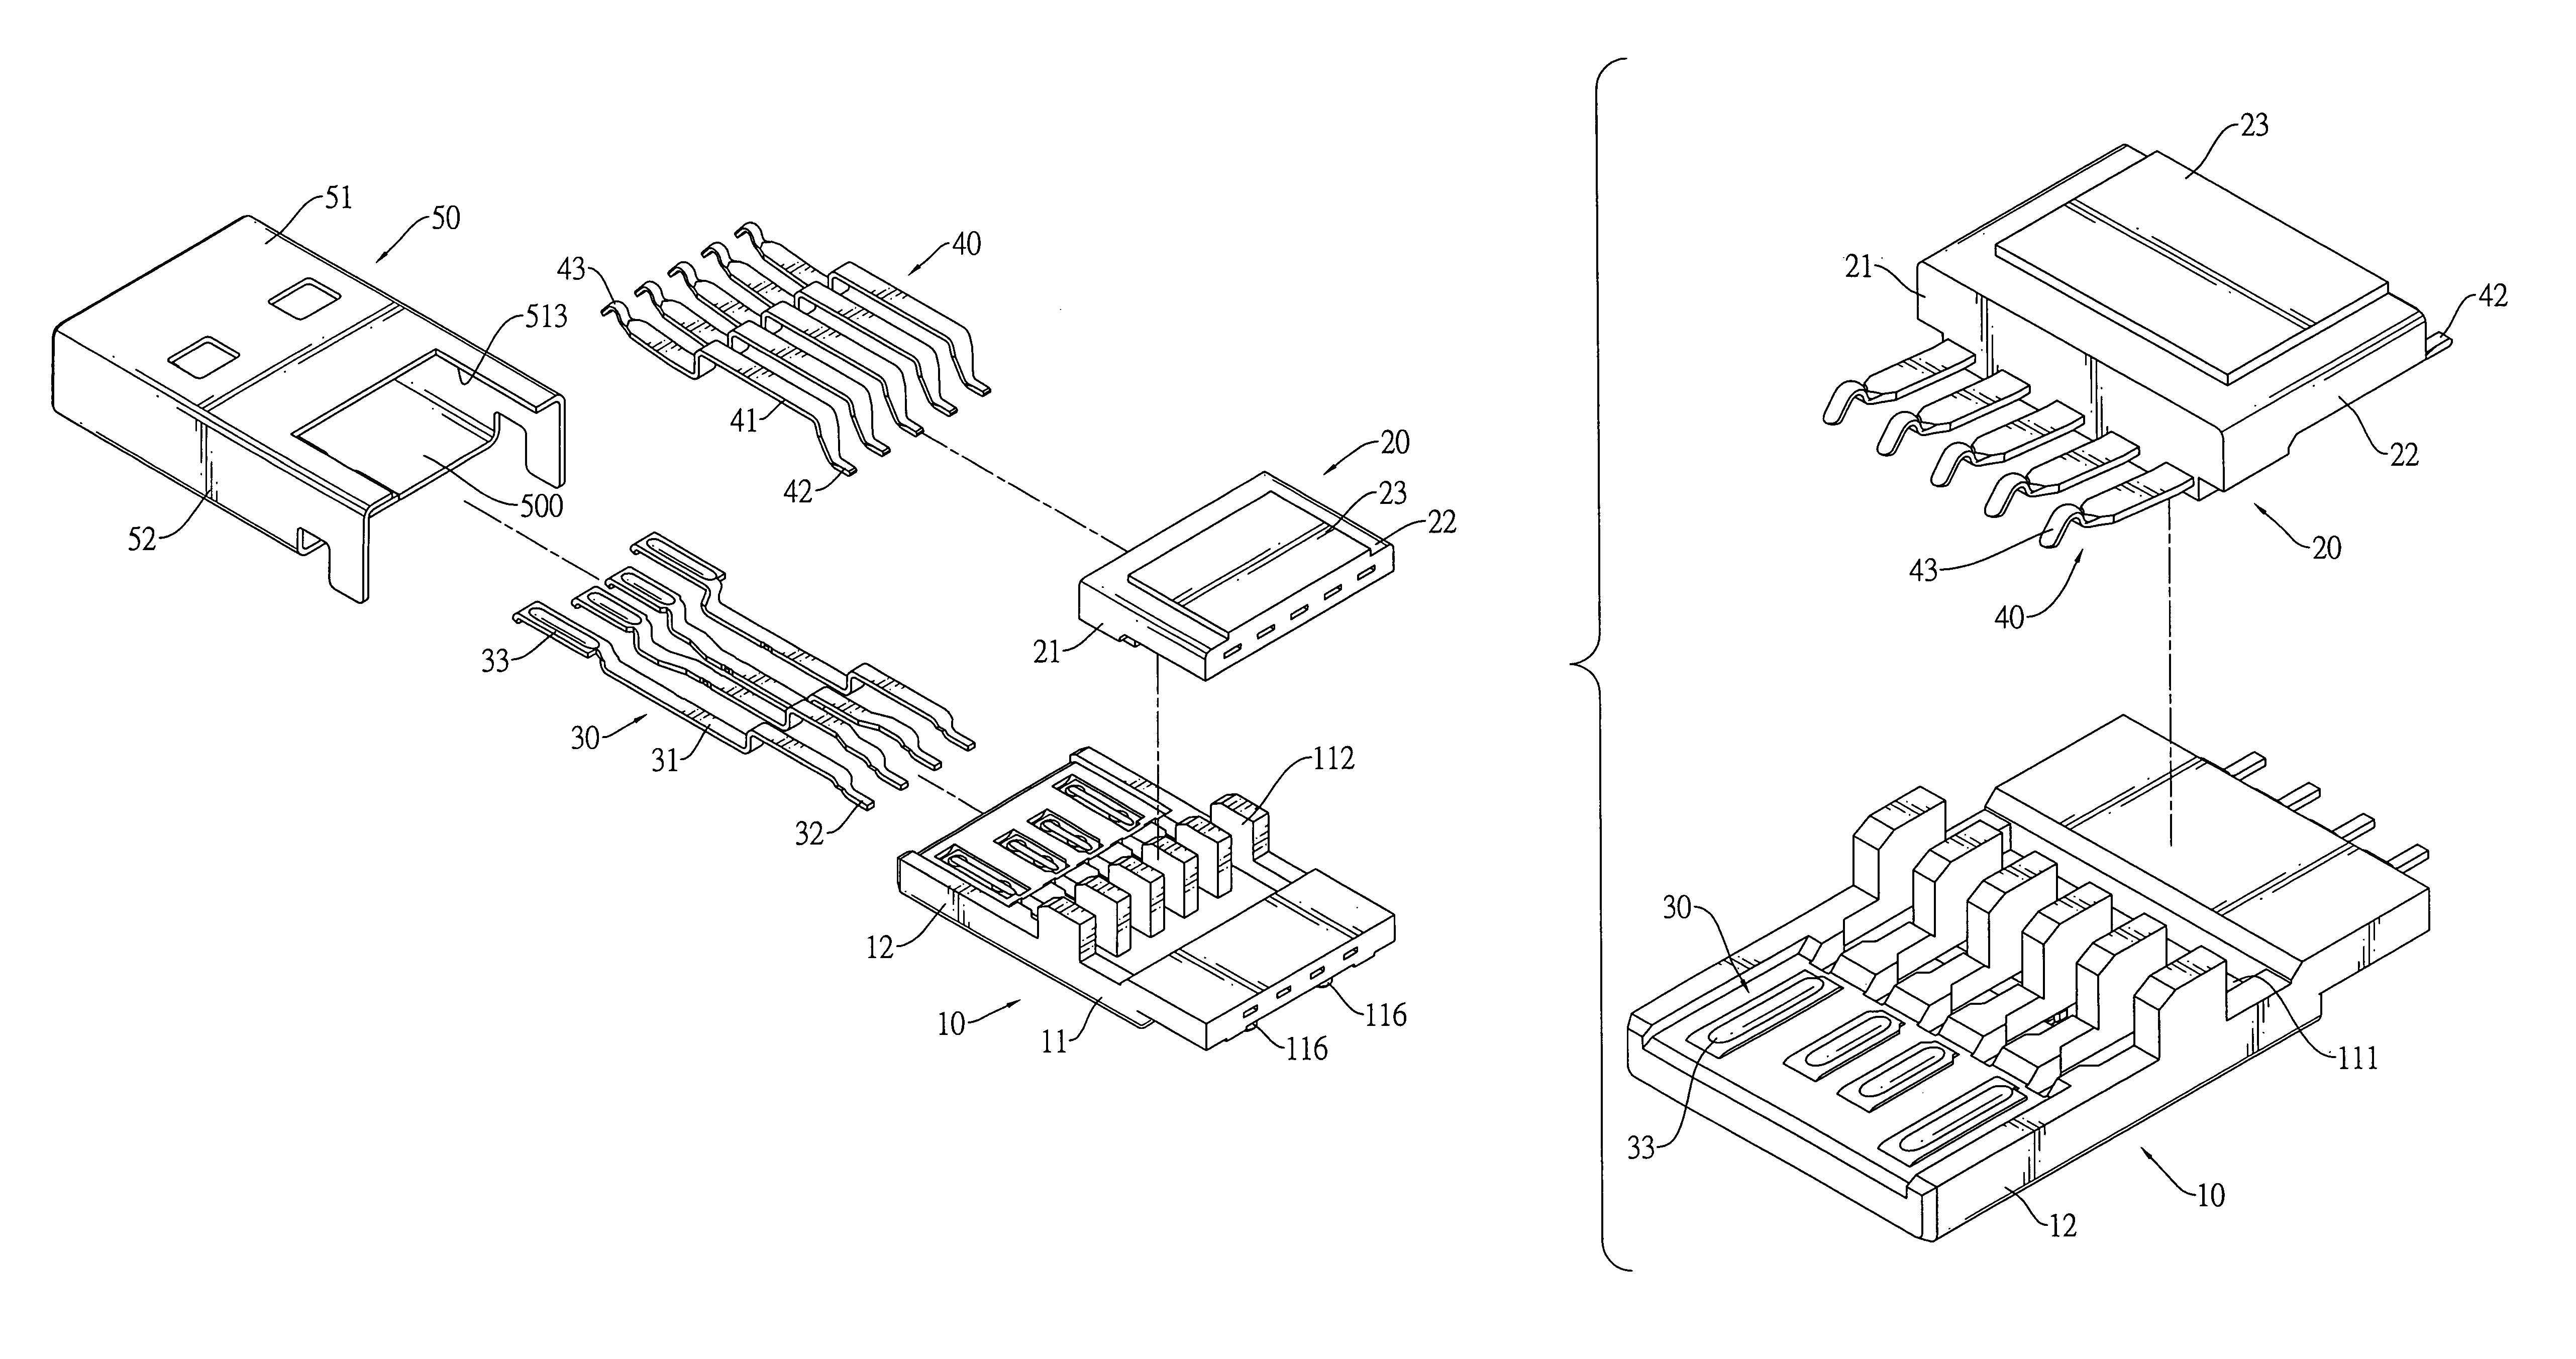 High-speed plug connector with a mounting bracket holding terminals